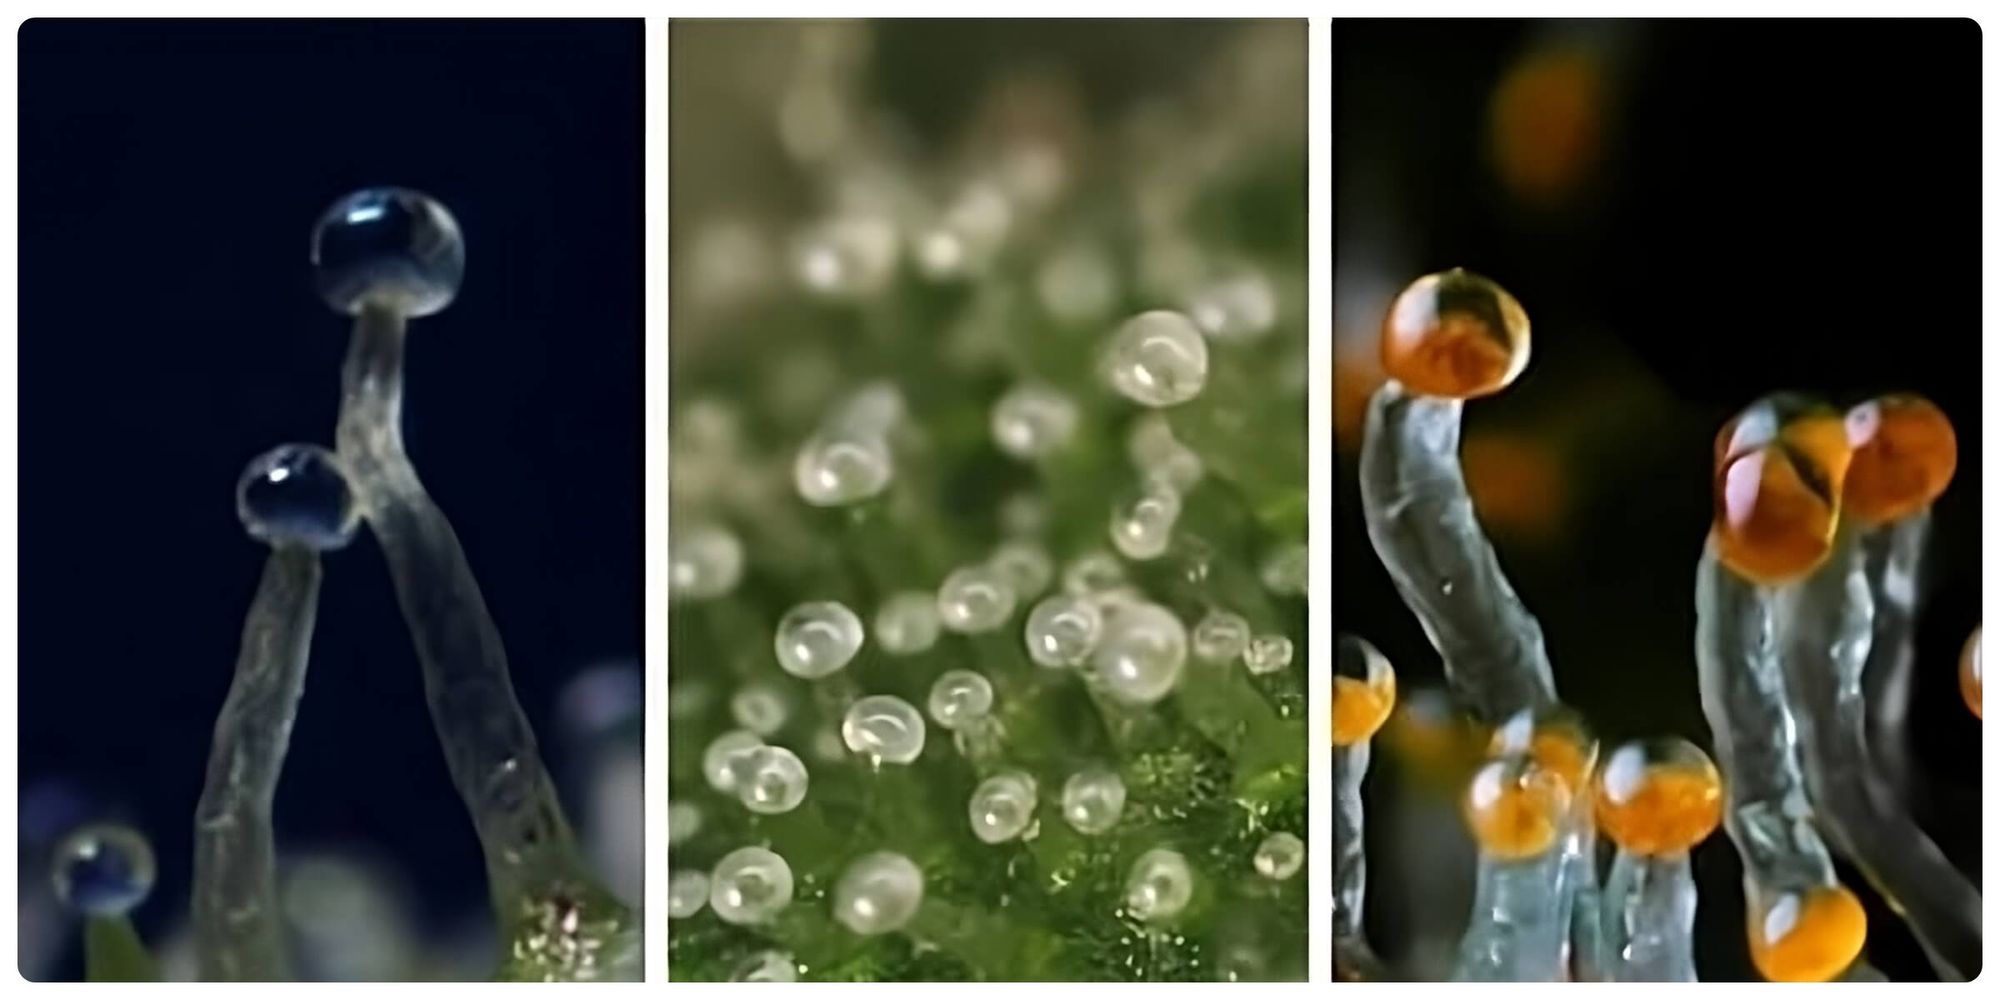 The three stages of Capitate-stalked trichome ripeness